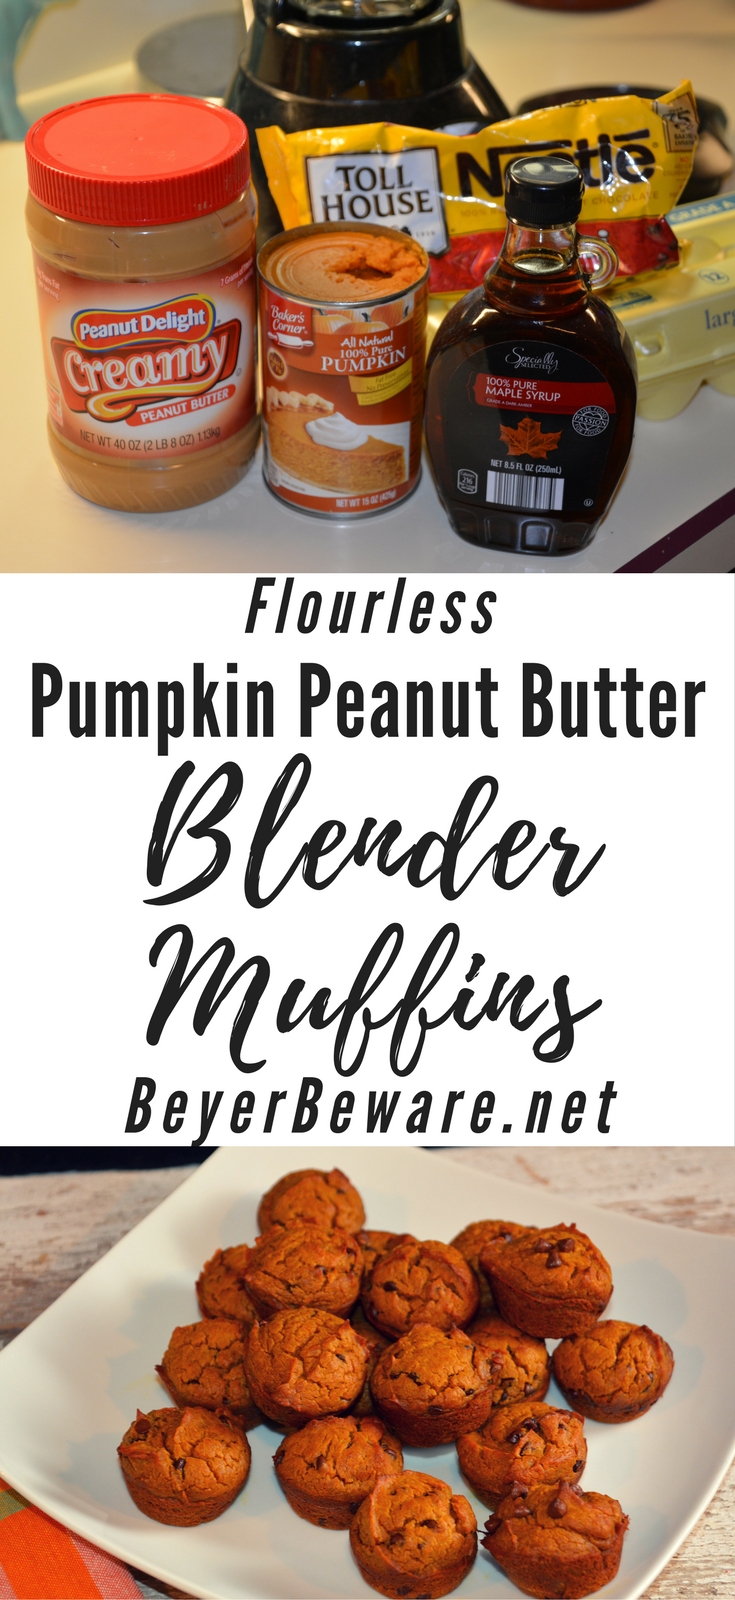 For anyone looking for a gluten-free muffin that is still satisfying, look no further than this flourless pumpkin peanut butter chocolate chip blender muffin recipe.